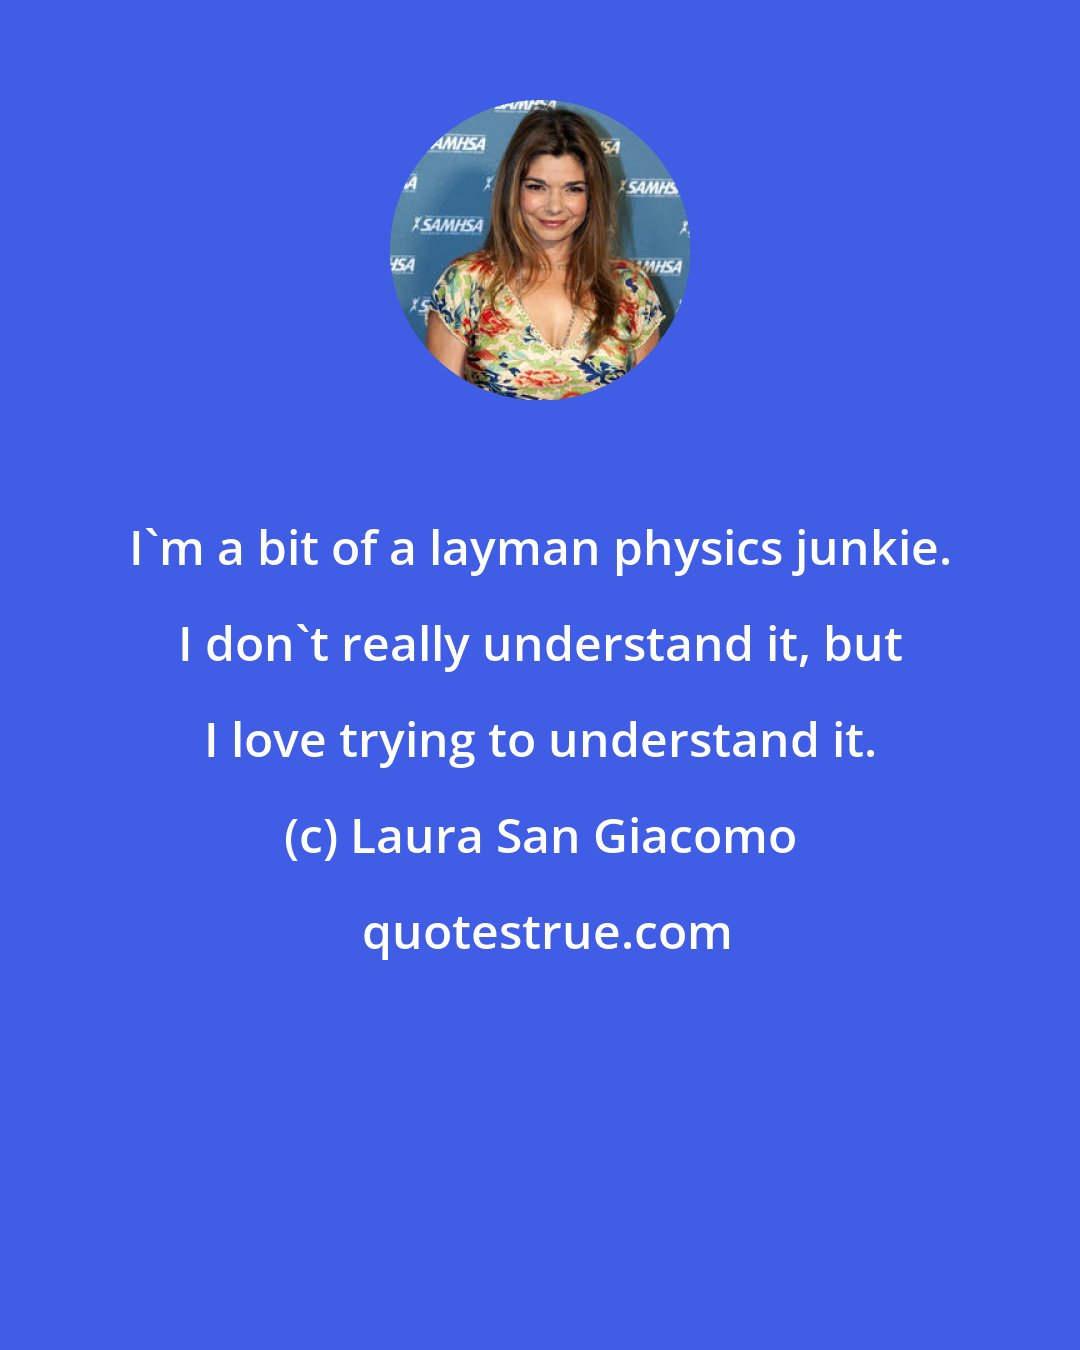 Laura San Giacomo: I'm a bit of a layman physics junkie. I don't really understand it, but I love trying to understand it.